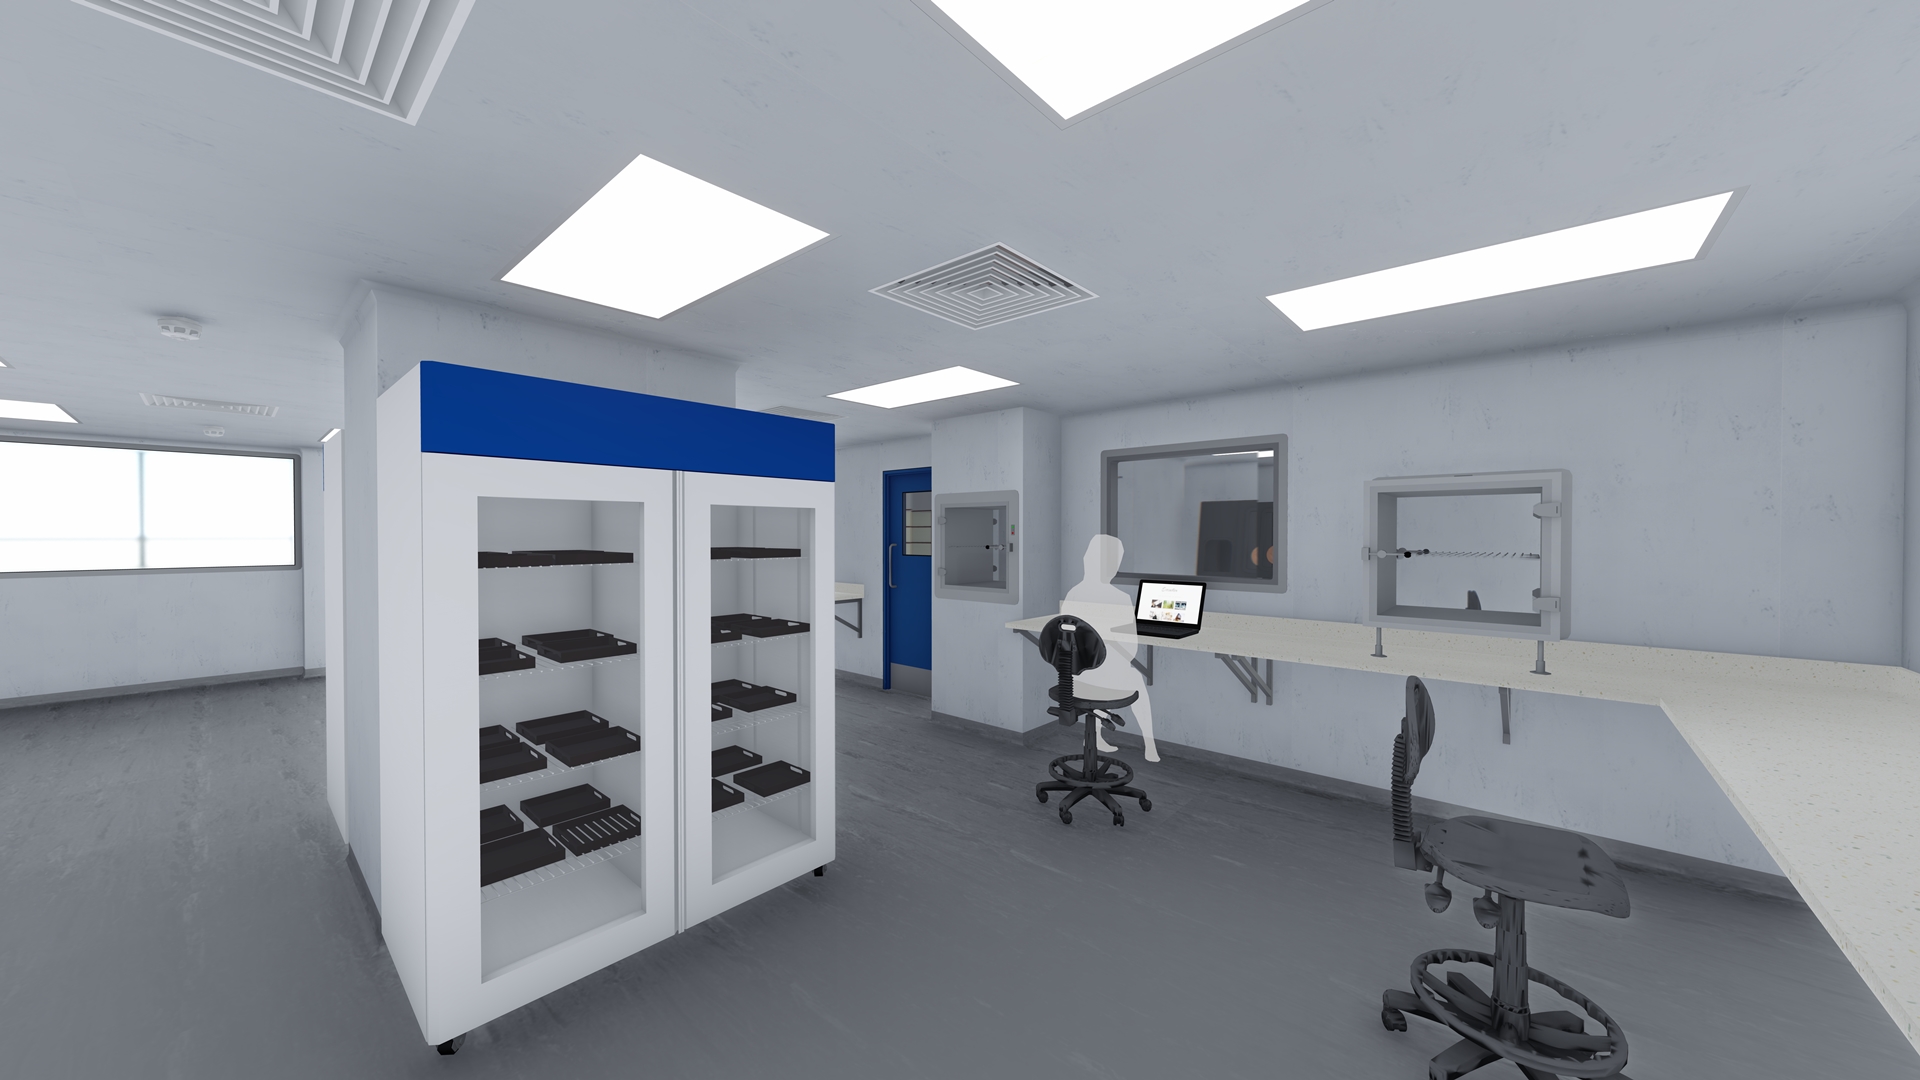 A new pharmacy and aspectic suite is to be built at Weston Park Hospital in Sheffield